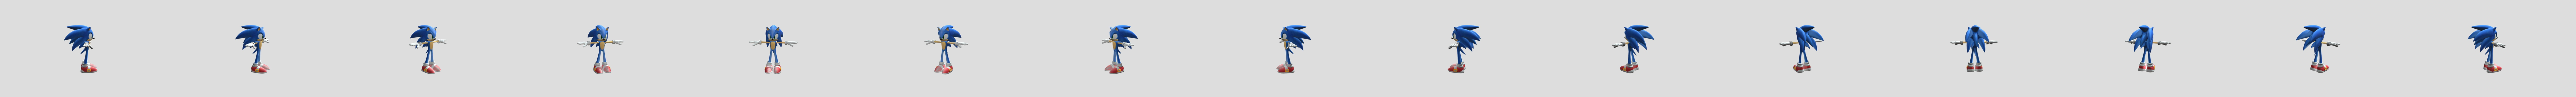 Xbox 360 Sonic The Hedgehog 06 Sonic Download Free 3d Model By Sonicmodelarchive Gabby Sanabria De Geraci 8aad0bd